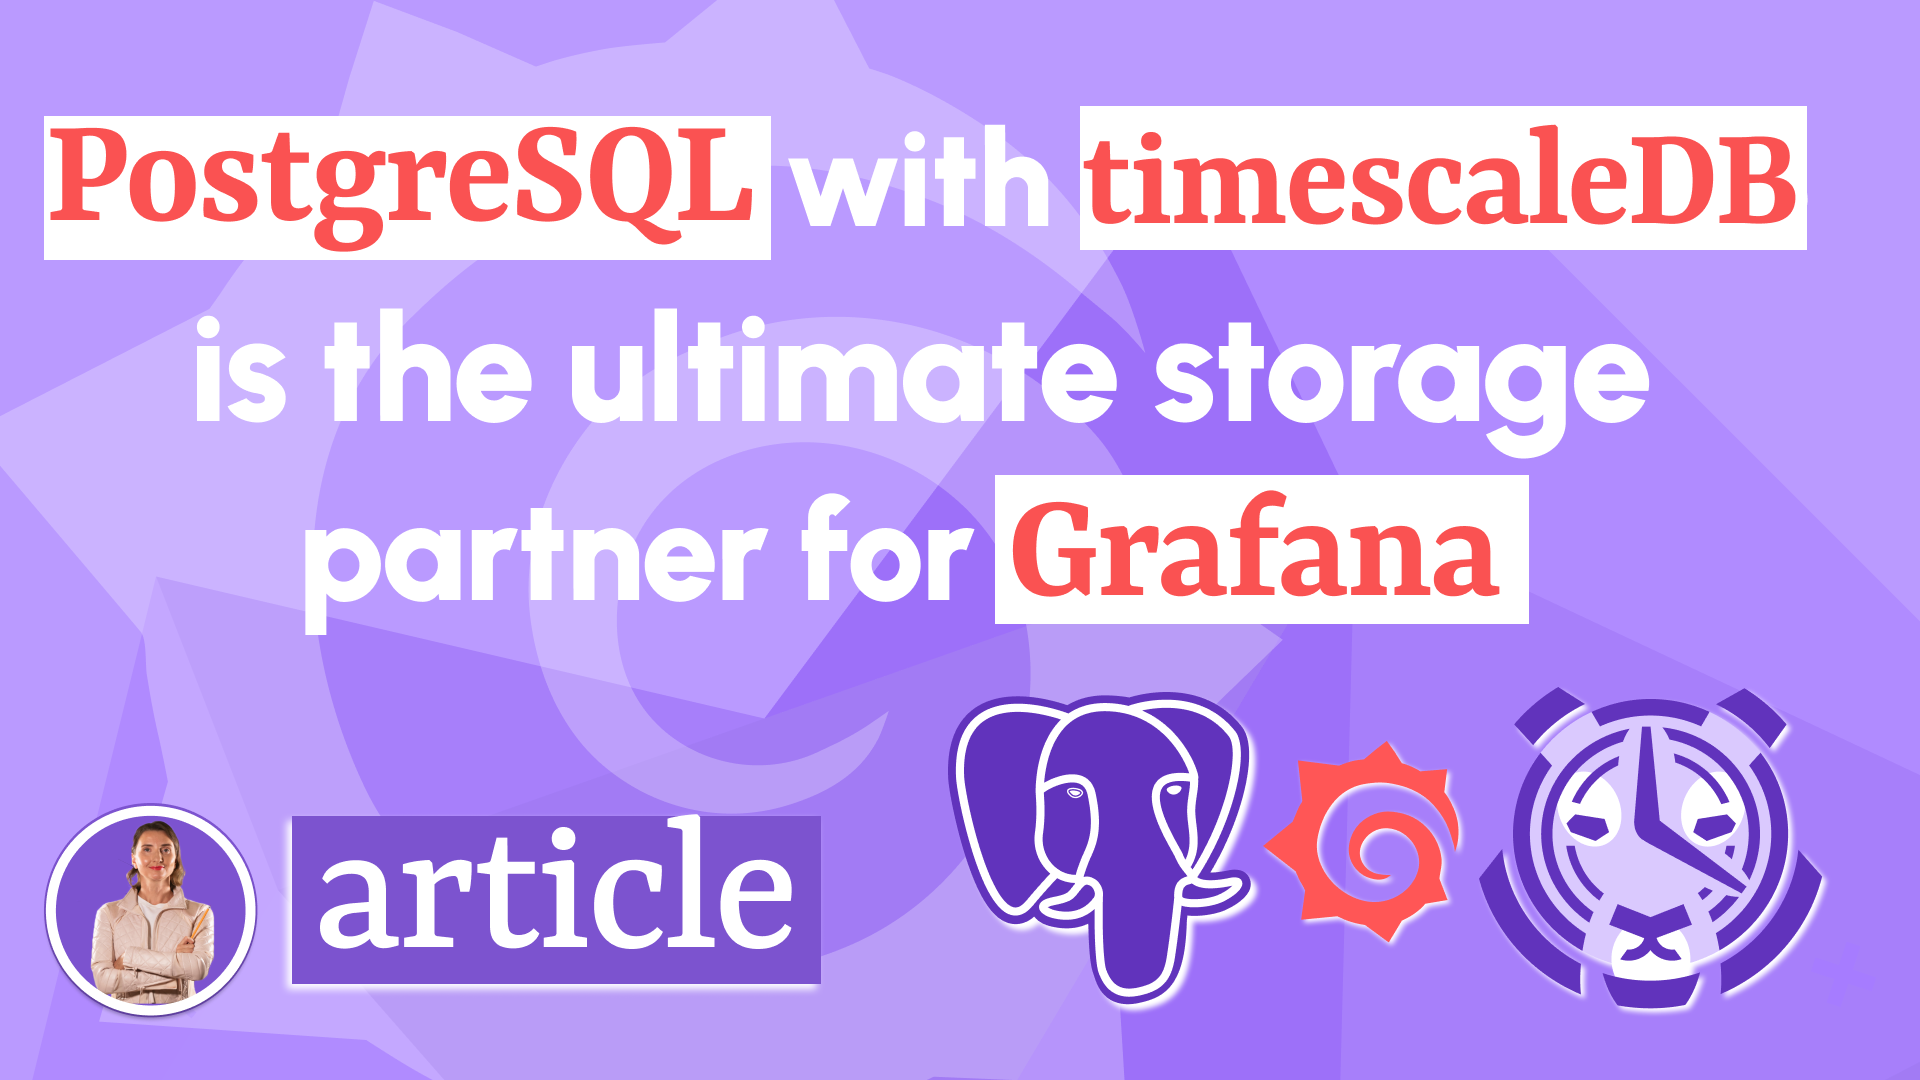 PostgreSQL with Timescale is the ultimate storage partner for Grafana